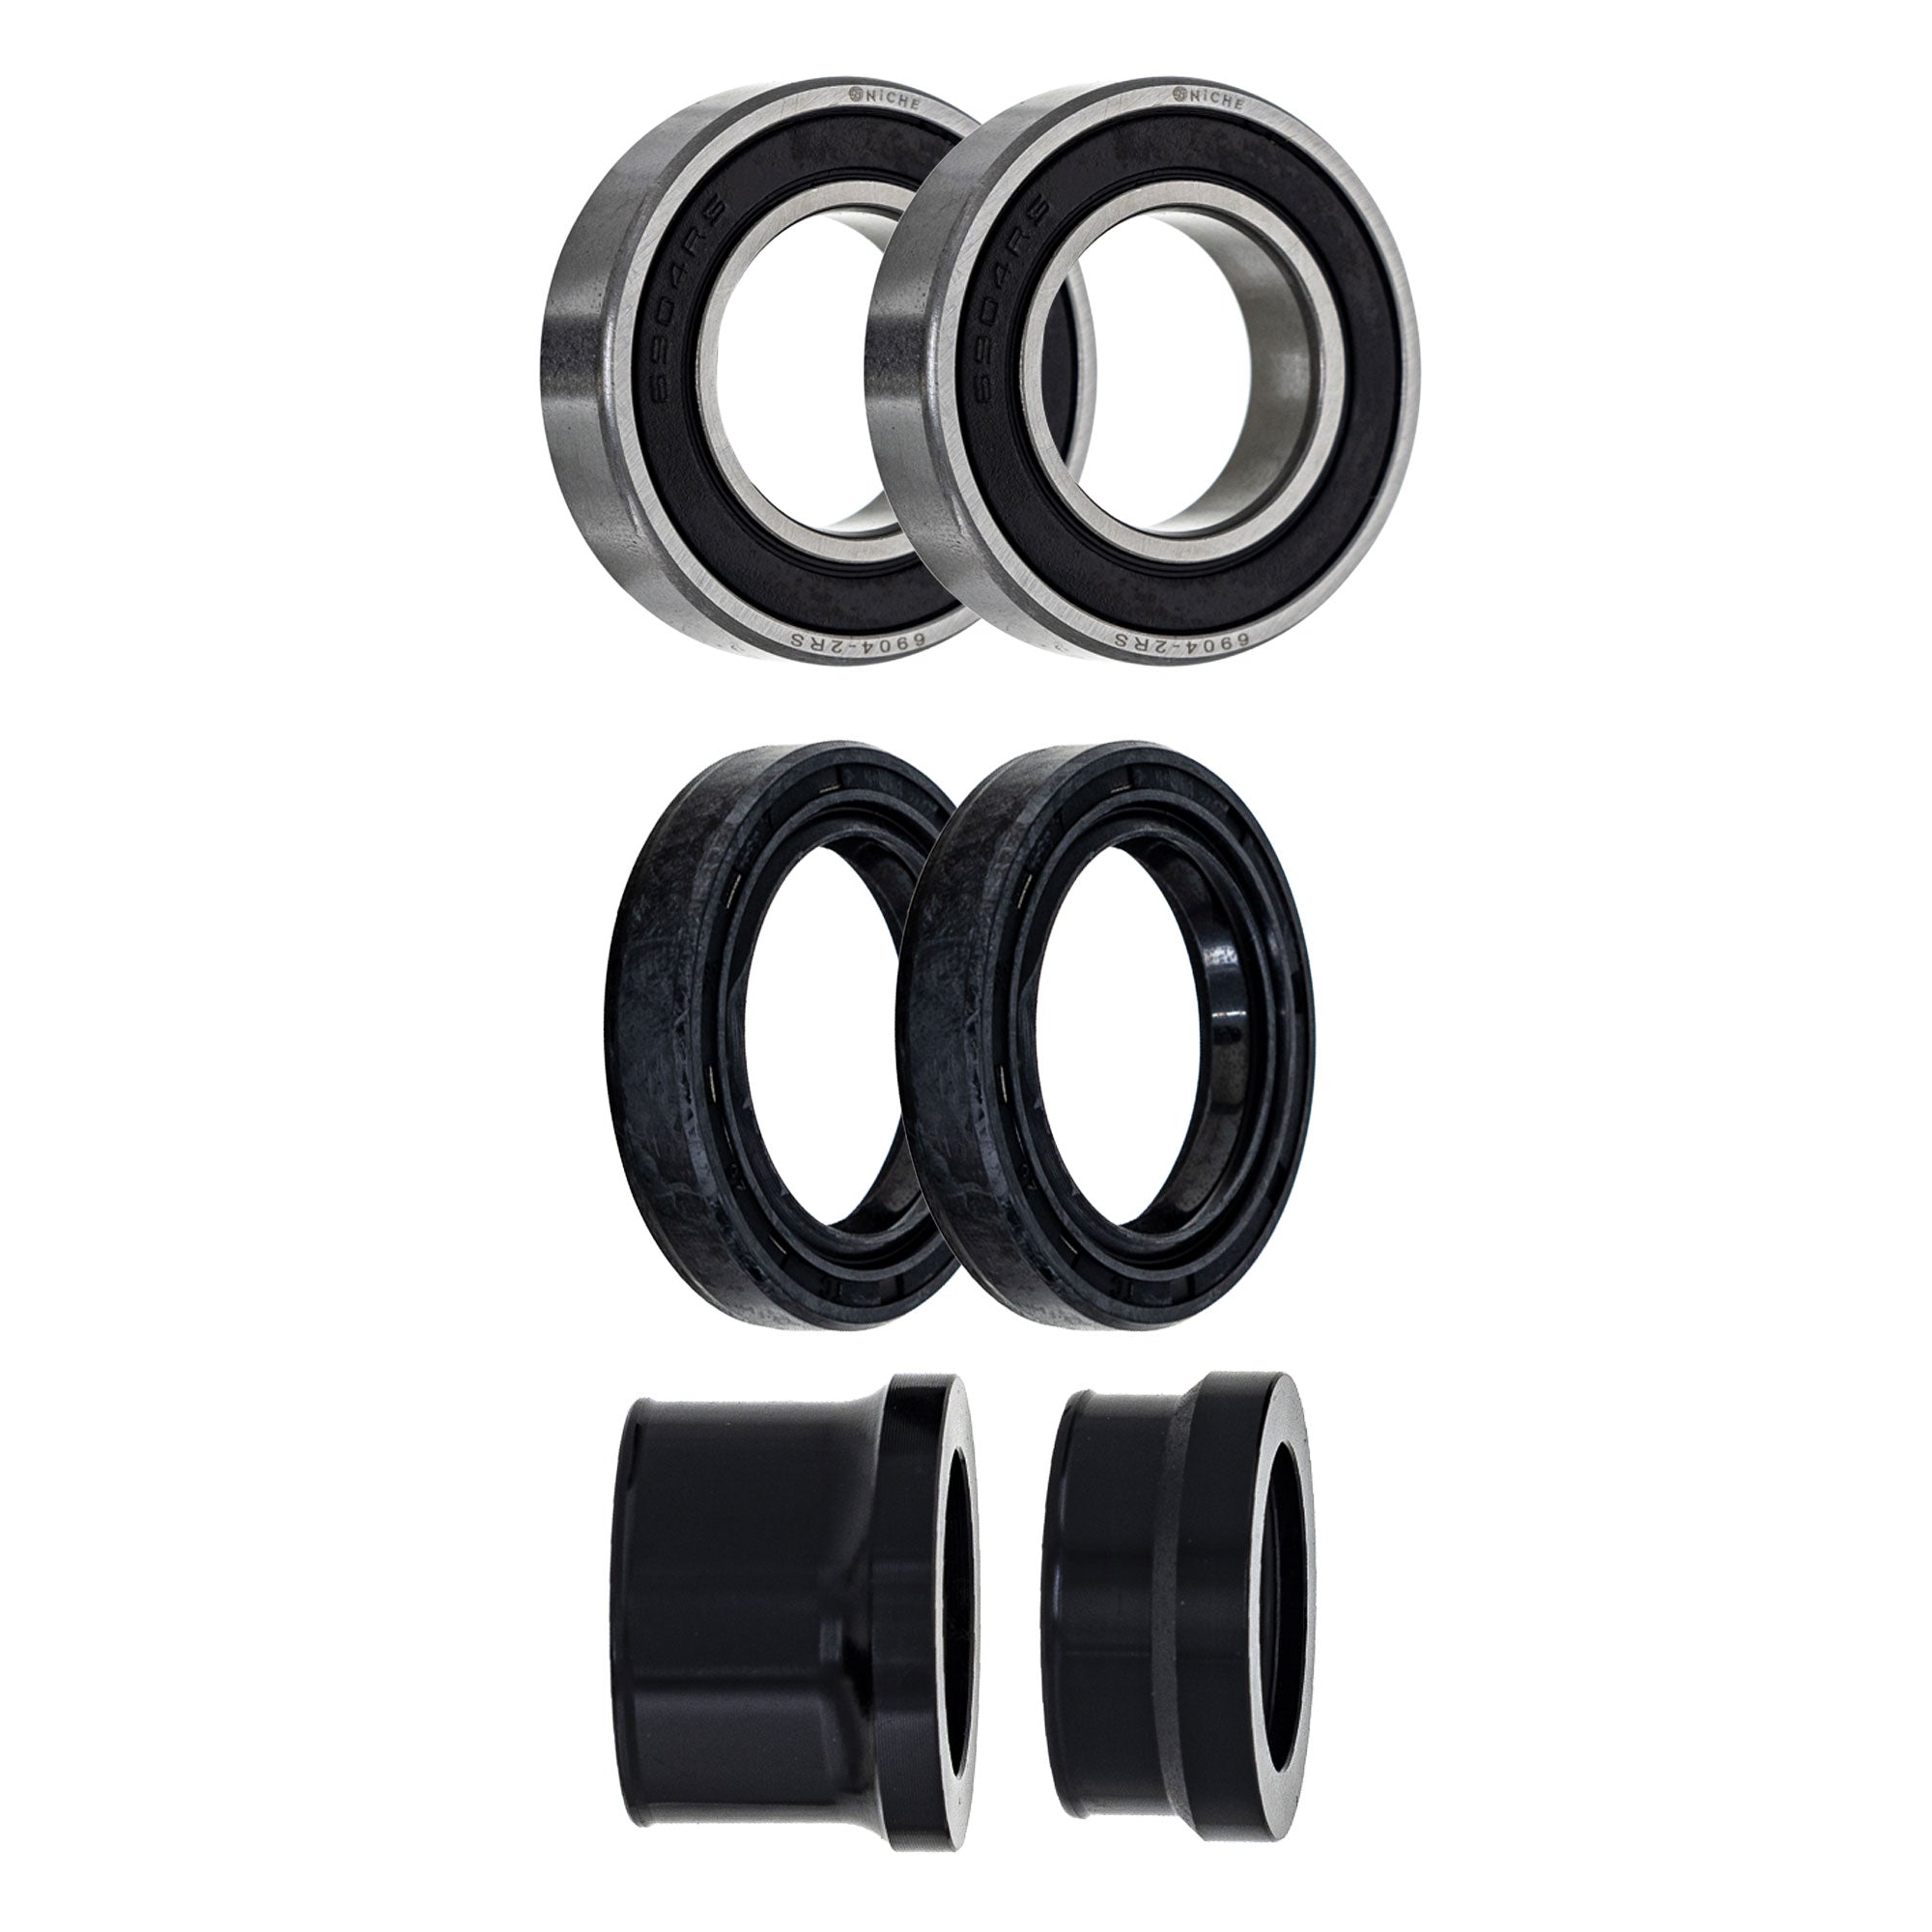 Wheel Bearing Spacer Seal Kit for zOTHER YZ450F YZ250X YZ250F YZ250 NICHE MK1009213